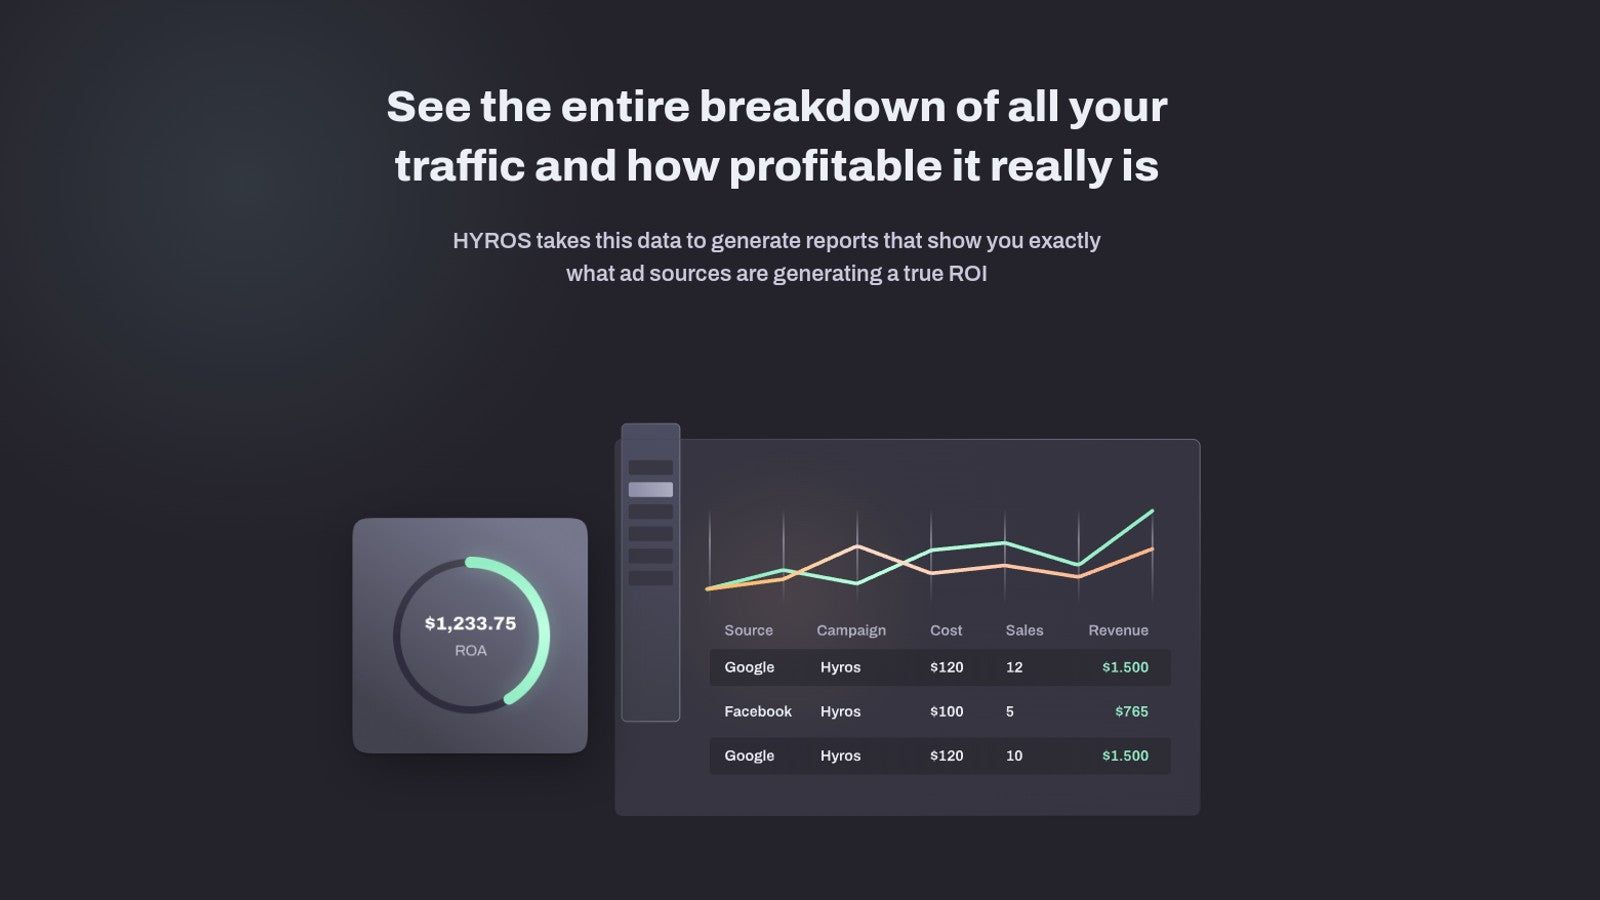 Visualize the entire breakdown of all your traffic